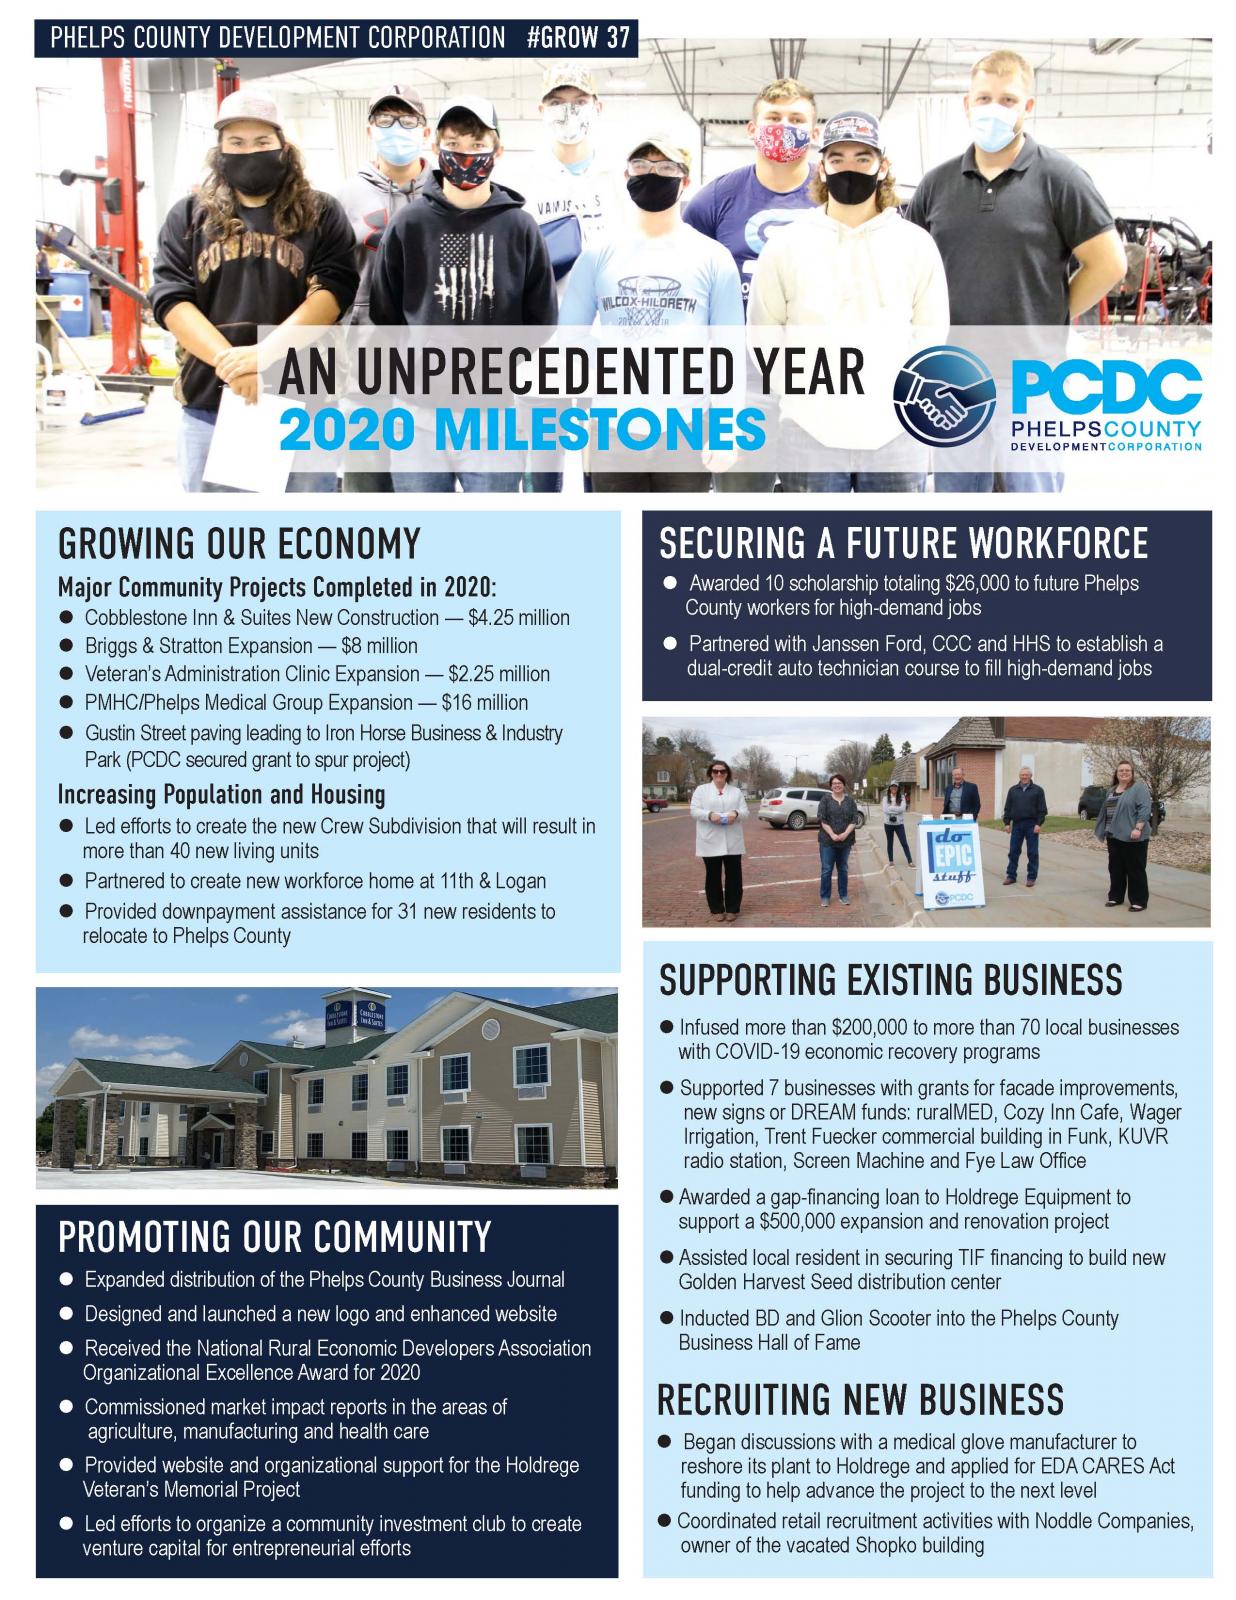 Thumbnail Image For PCDC Year in Review 2020